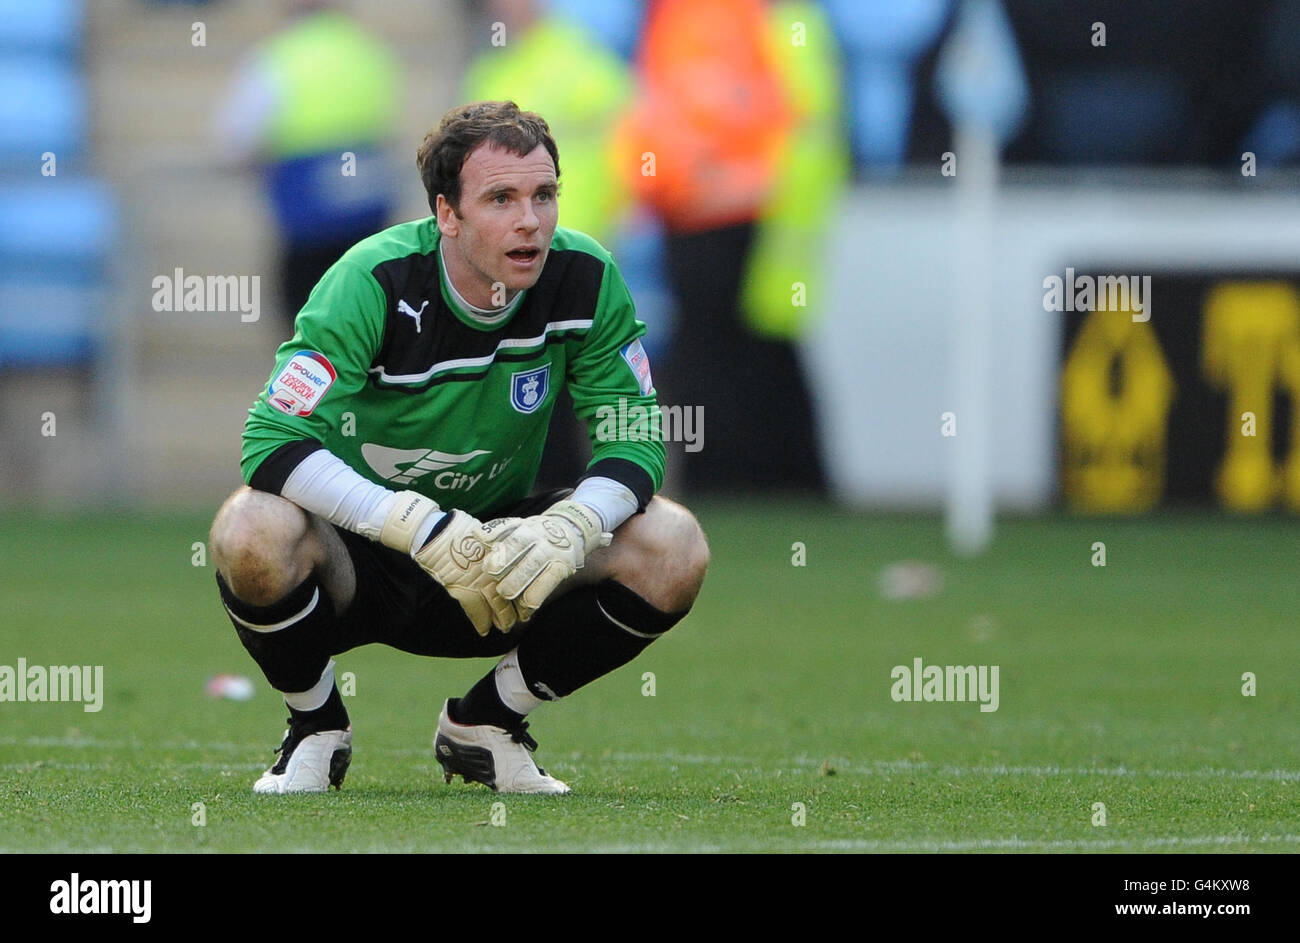 Coventry City's Joe Murphy shows his dejection after the final whistle during the npower Football League Championship match at the Ricoh Arena, Coventry. Stock Photo